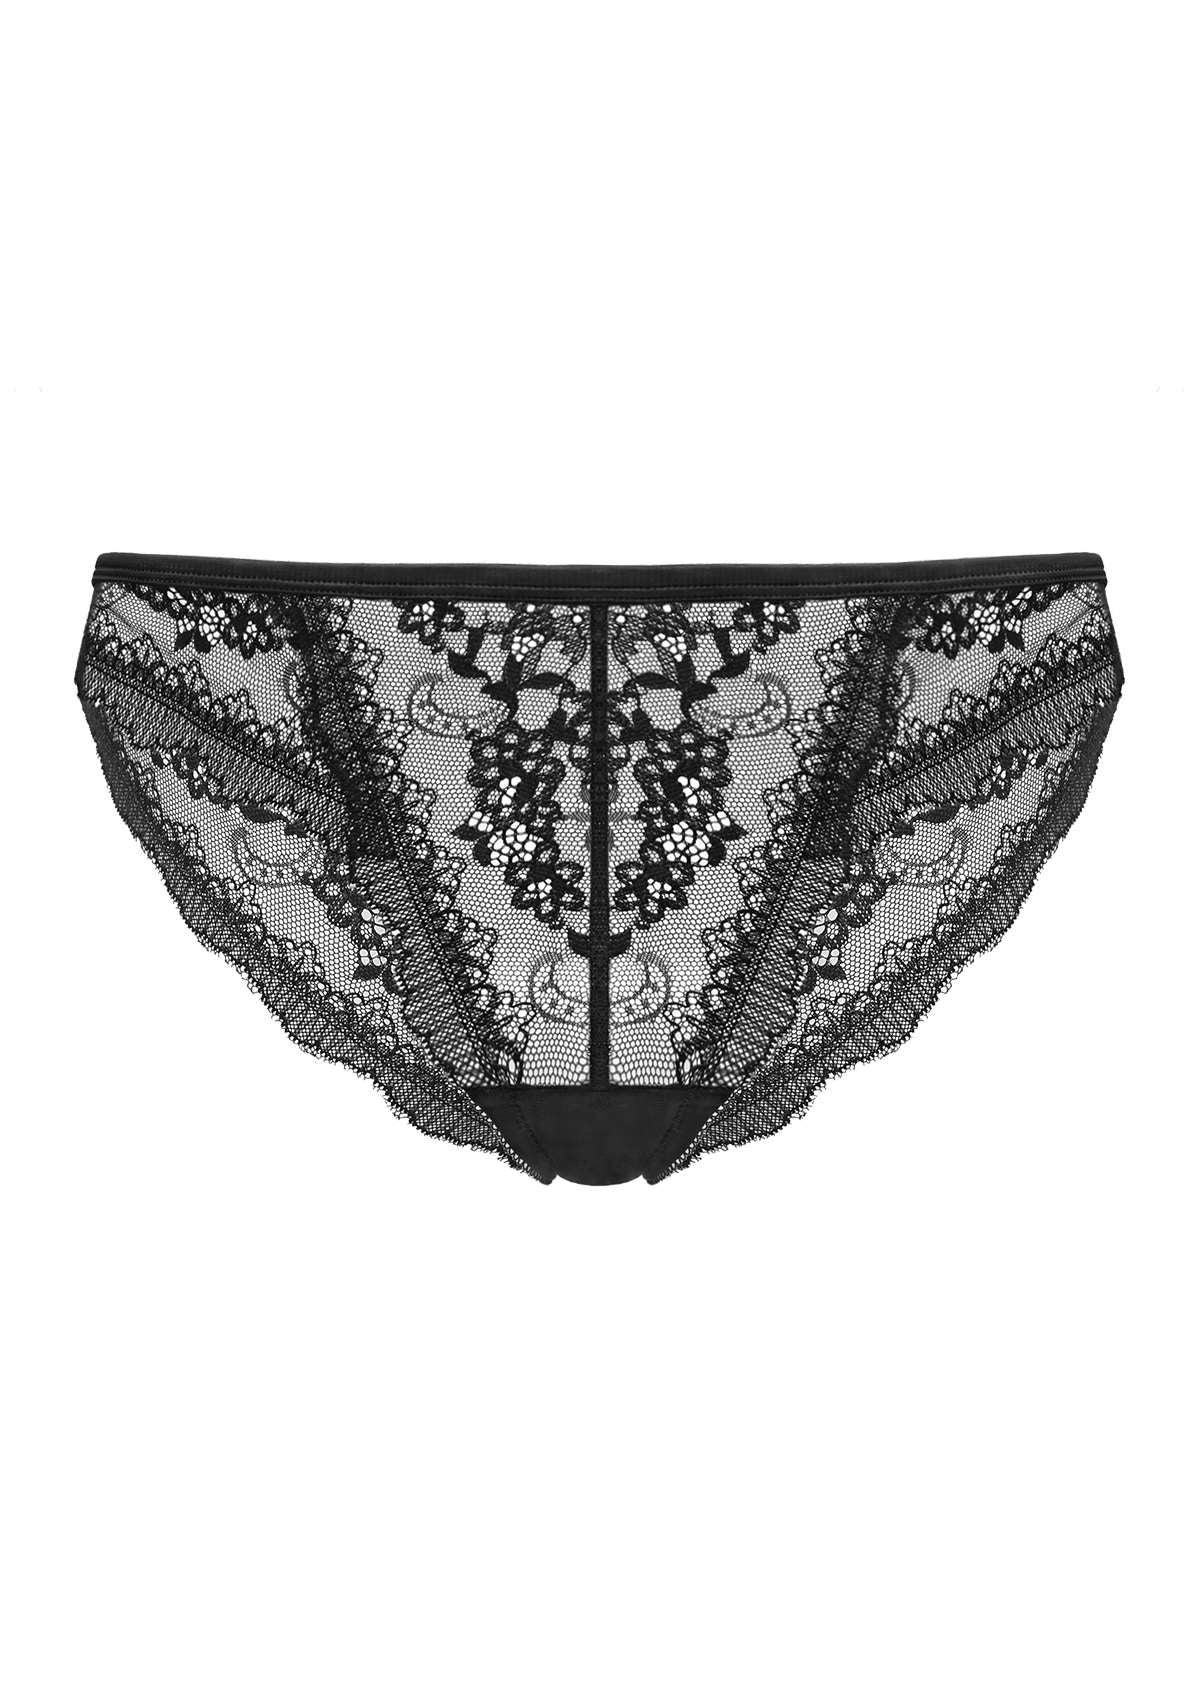 HSIA Floral Lace Bridal Cheeky Underwear: Delicate, Airy, And Comfy - Black / S